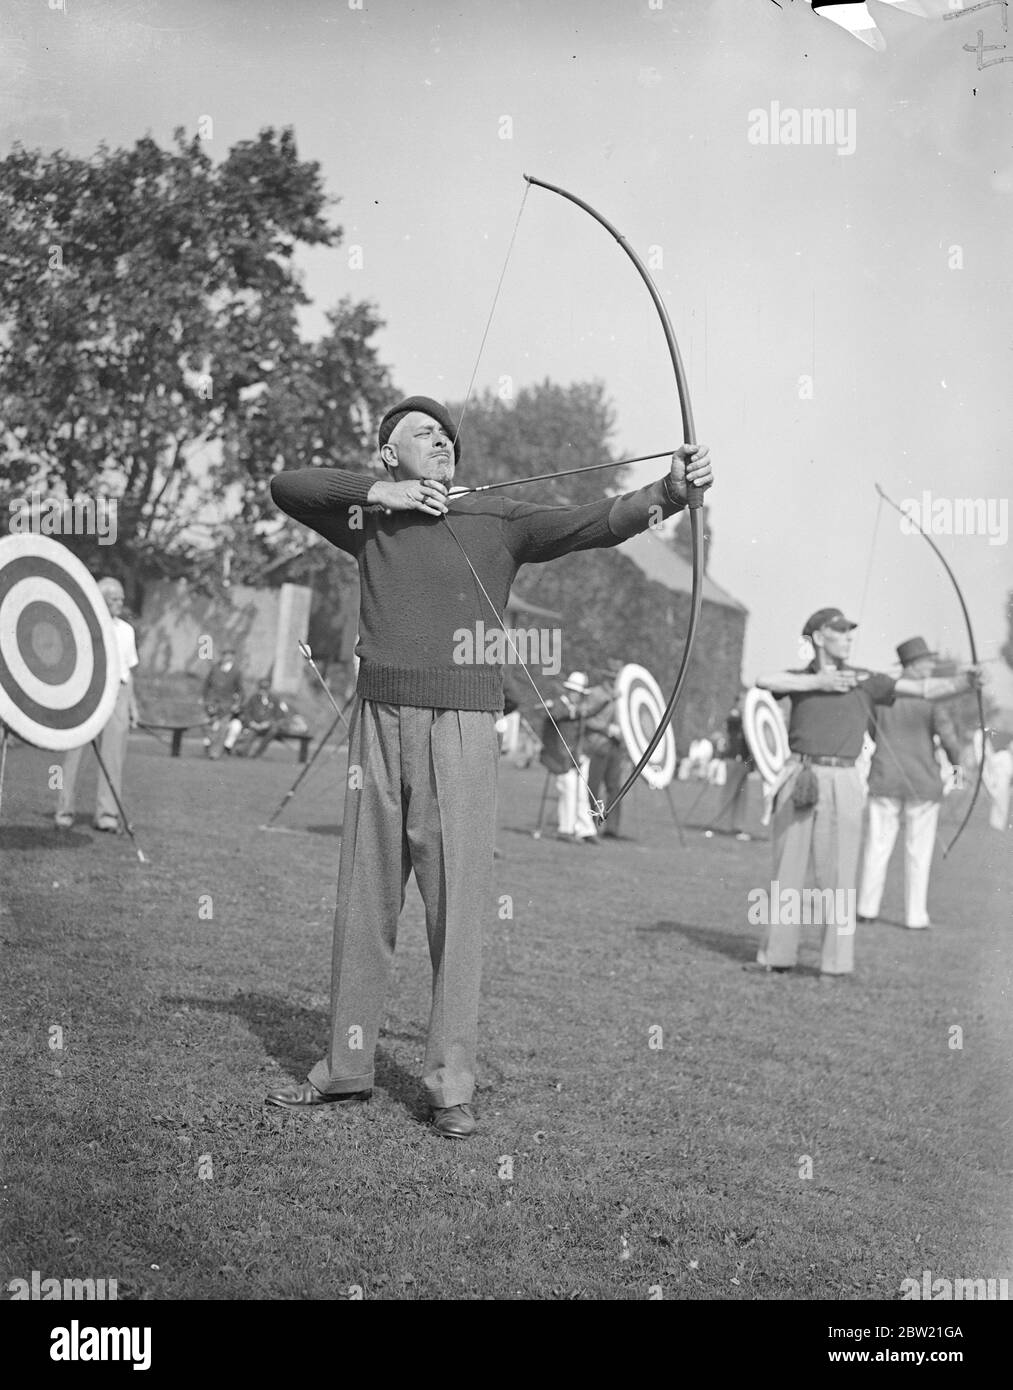 That archery is returning to popularity is indicated by the record number of entries in the Southern Counties Championships which has opened at the Imperial Services College, Windsor. Mr J. Weston Martyrn, well-known author of sea stories, taking aim. 31 August 1937 Stock Photo